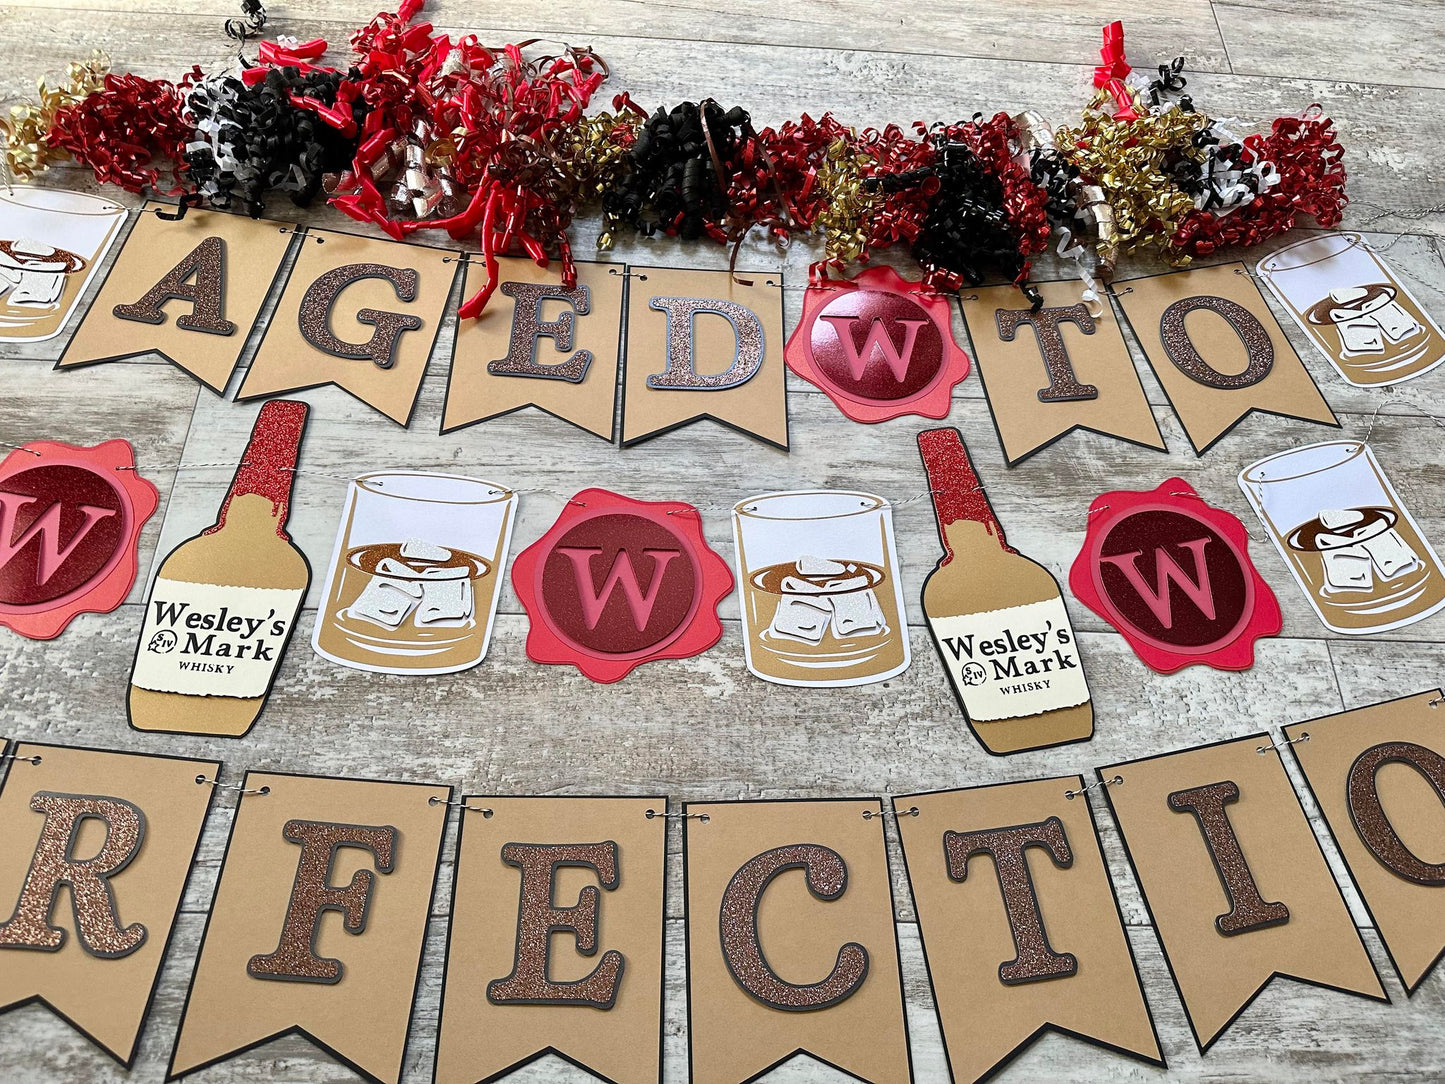 Aged To Perfection Whiskey 40th 50th 60th 70th Birthday Party Banner